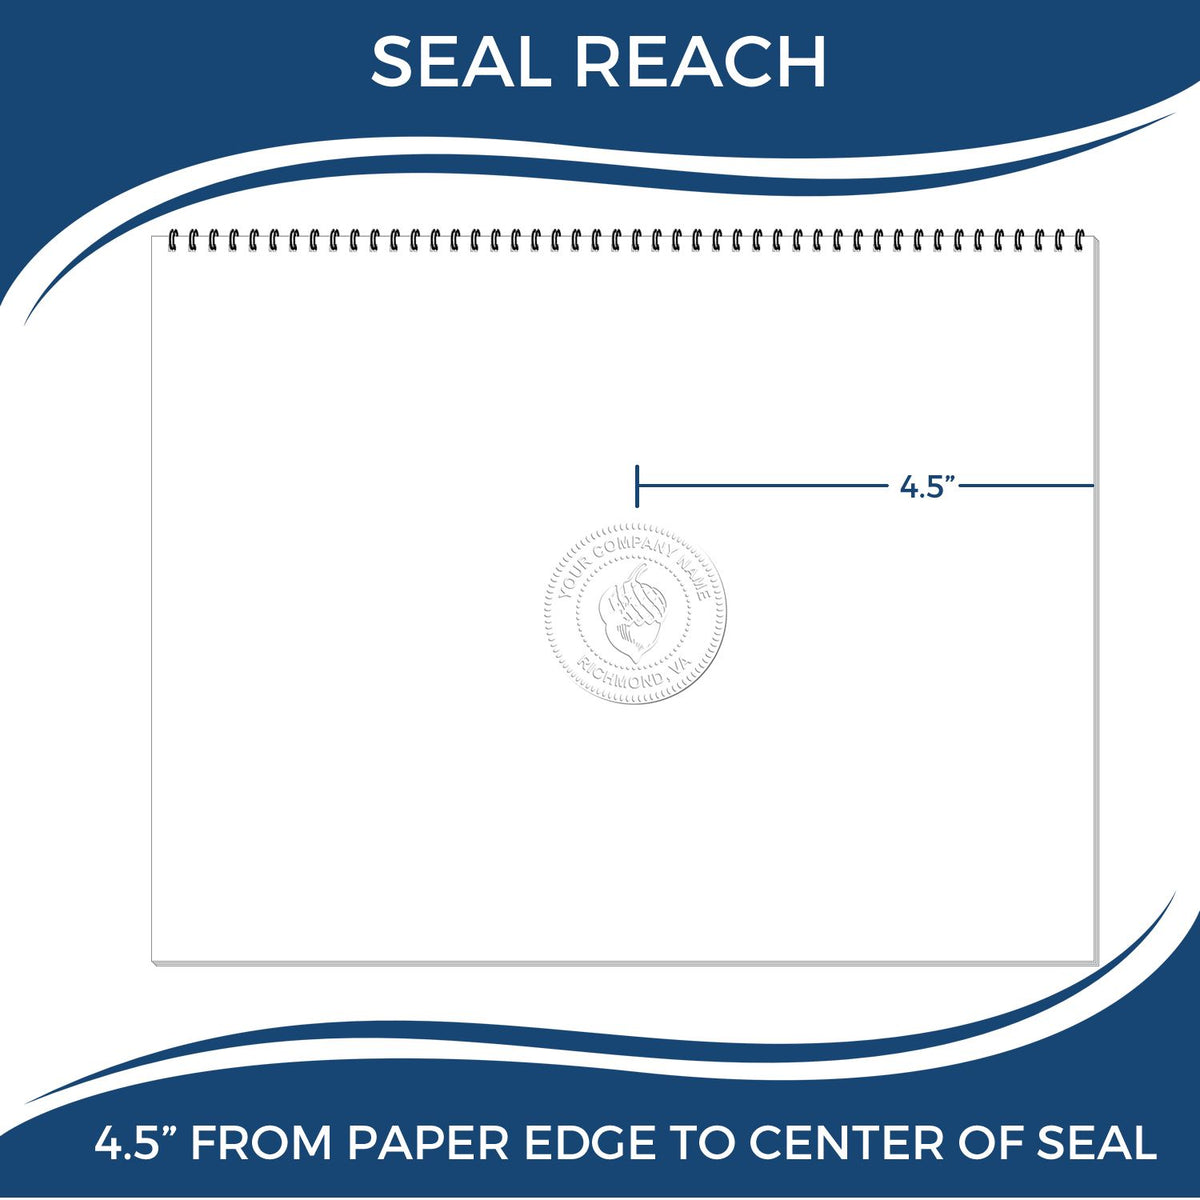 An infographic showing the seal reach which is represented by a ruler and a miniature seal image of the Extended Long Reach Alabama Architect Seal Embosser